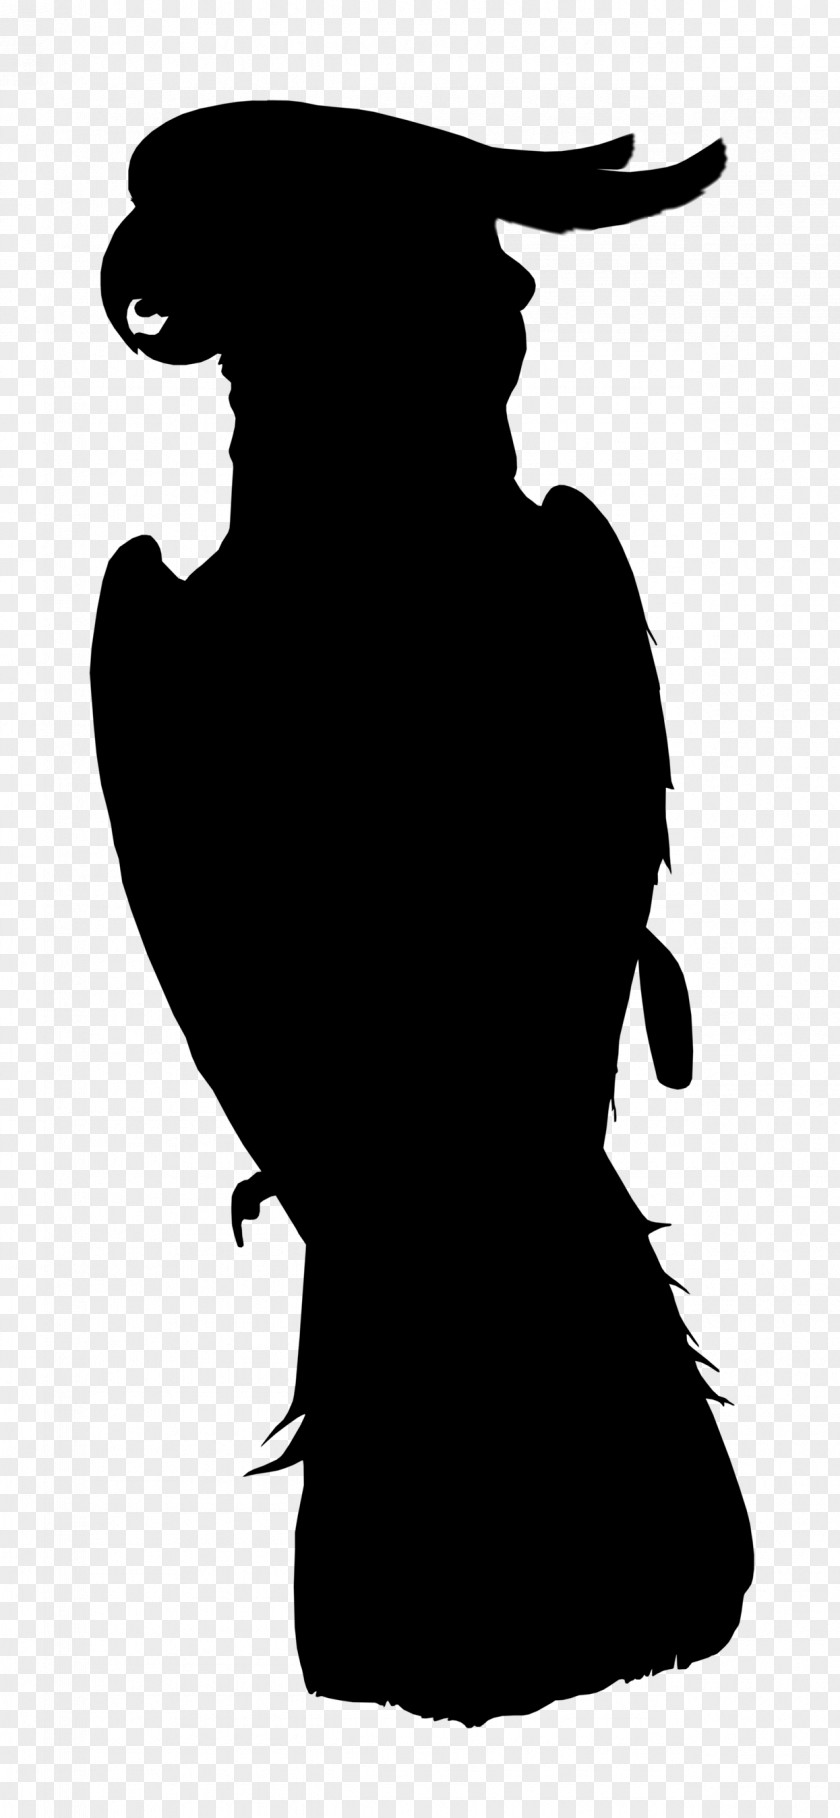 Illustration Clip Art Silhouette Character Fiction PNG